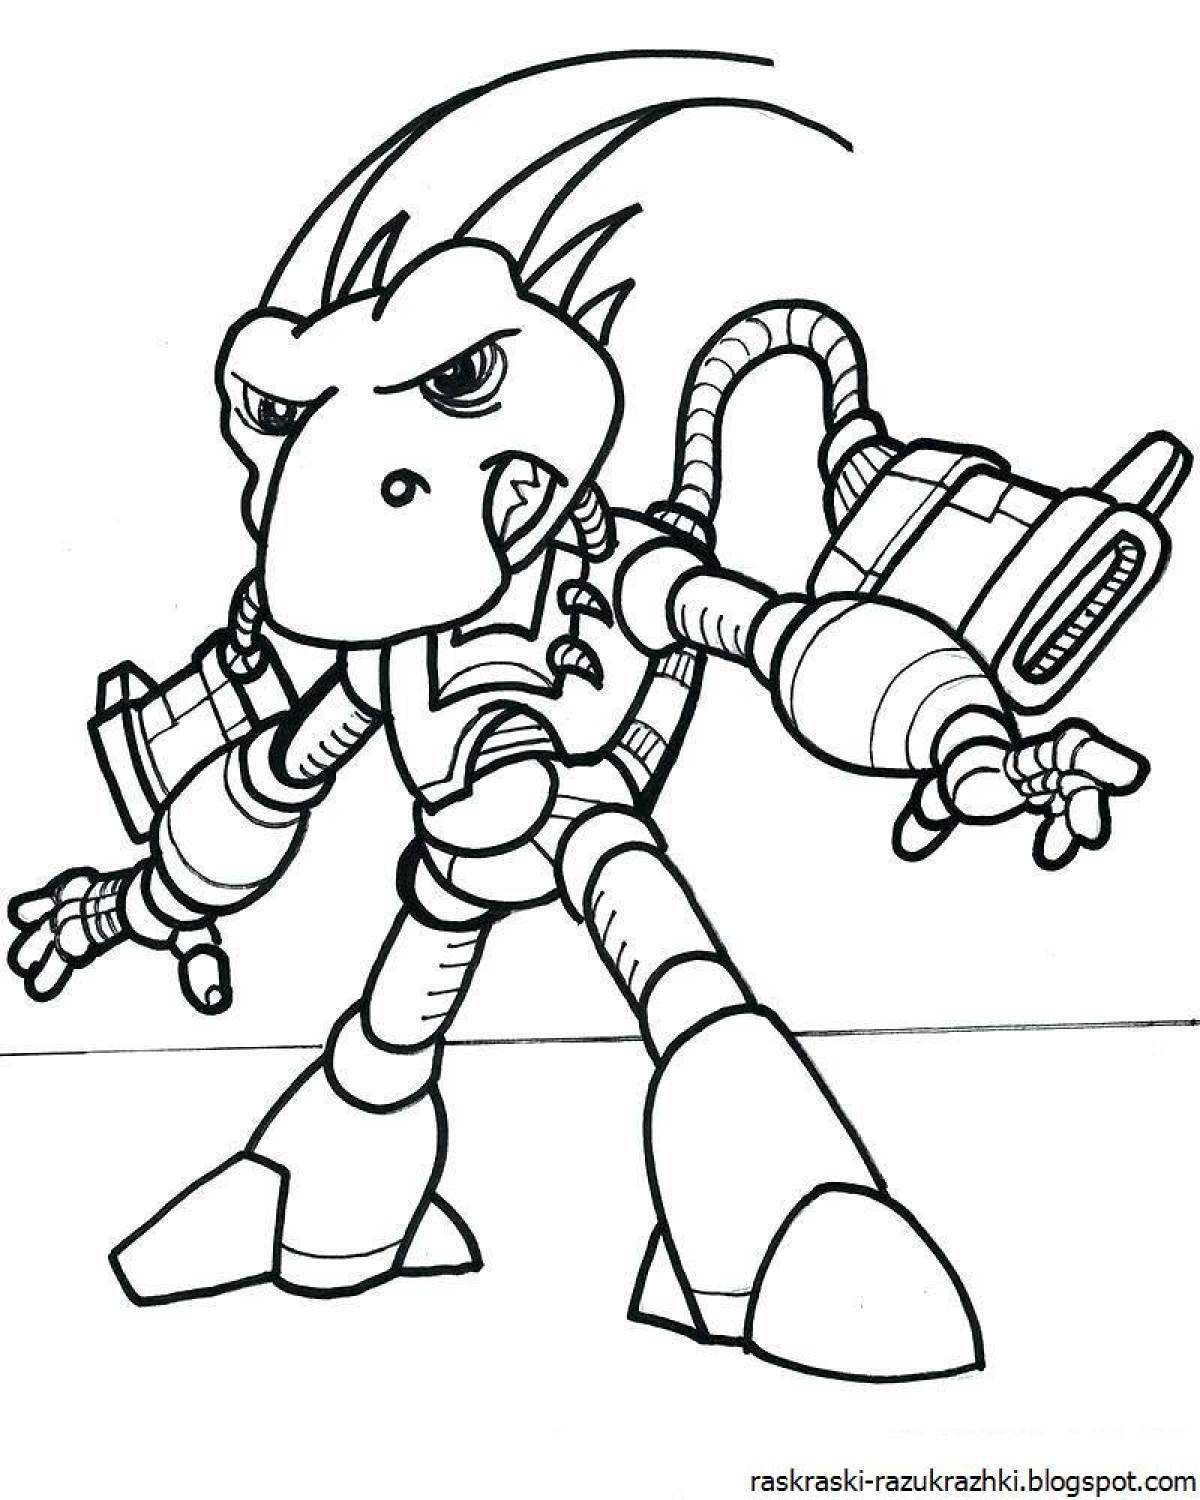 Color-frenzy robot coloring page for boys